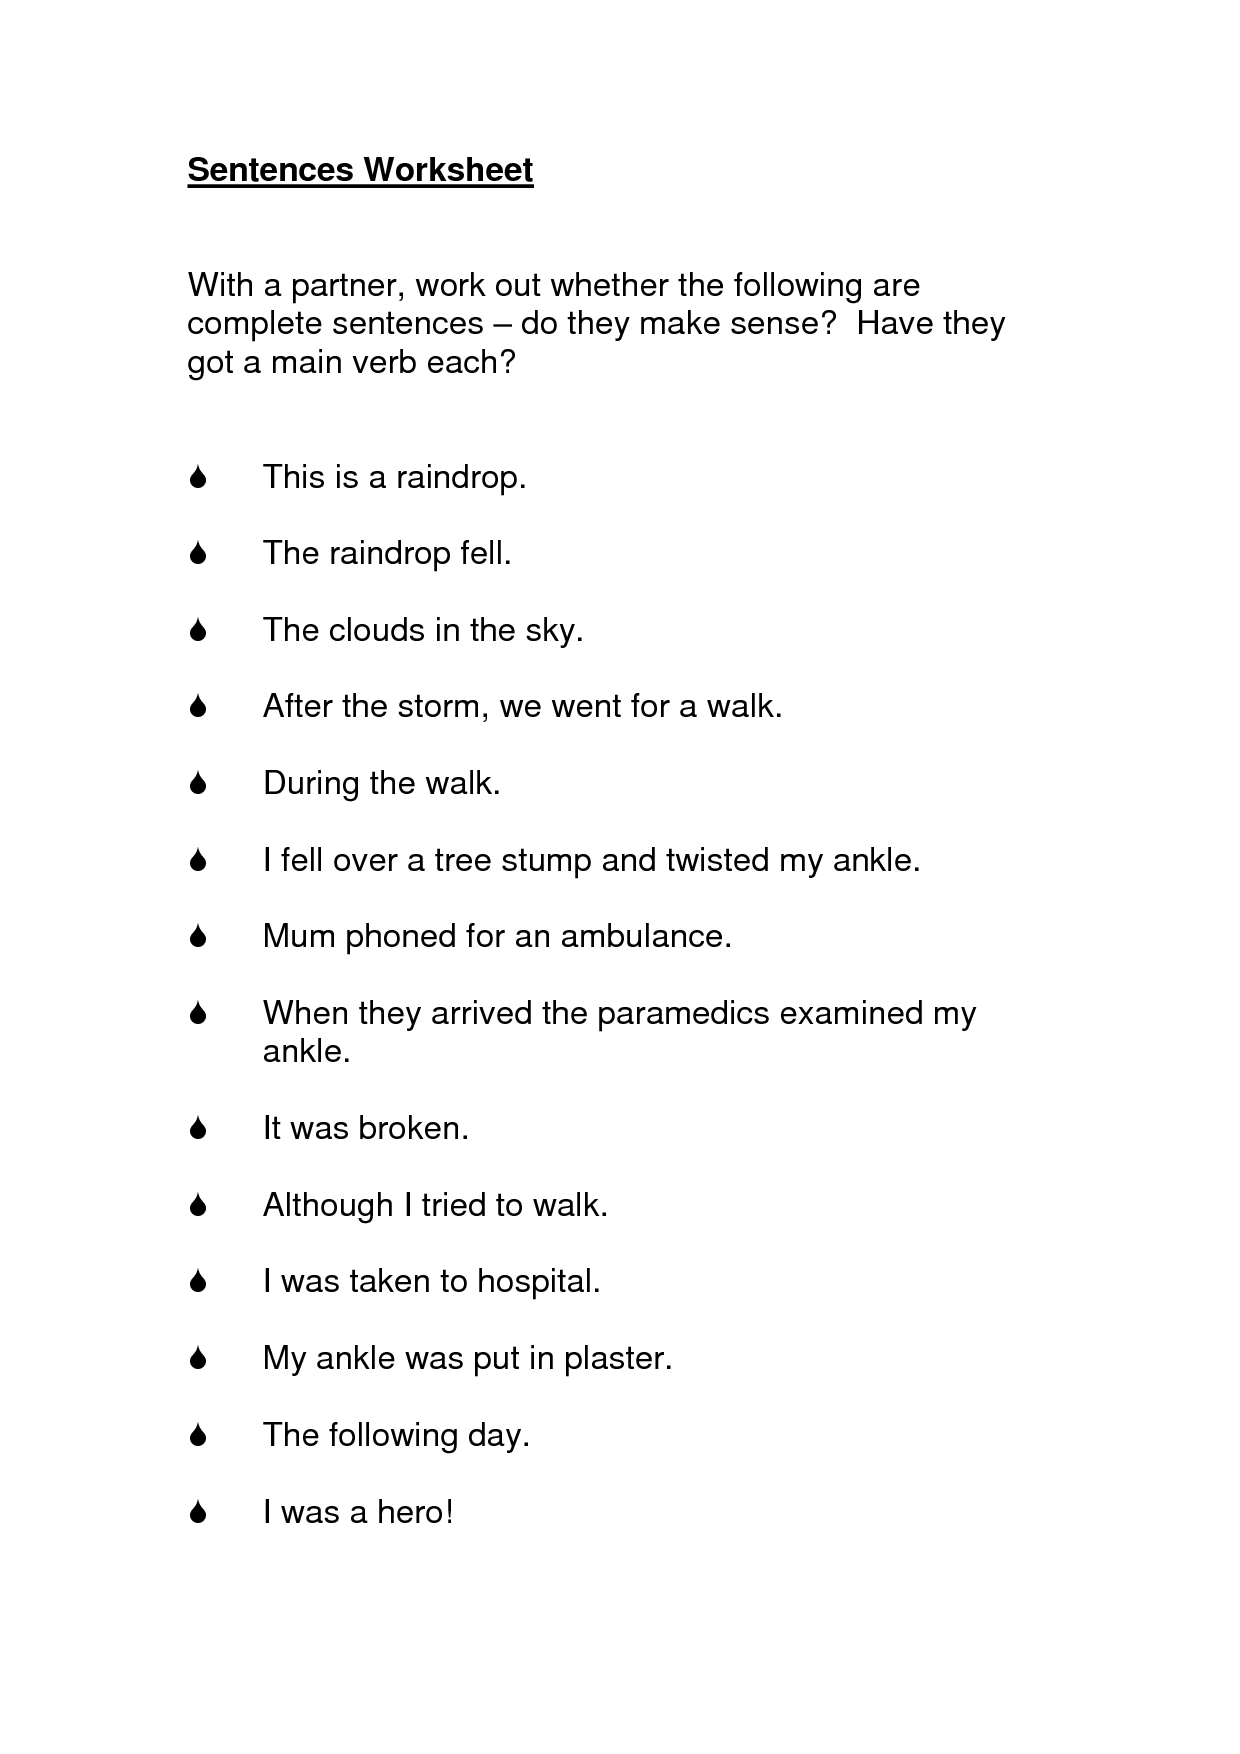 answering-questions-in-complete-sentences-worksheet